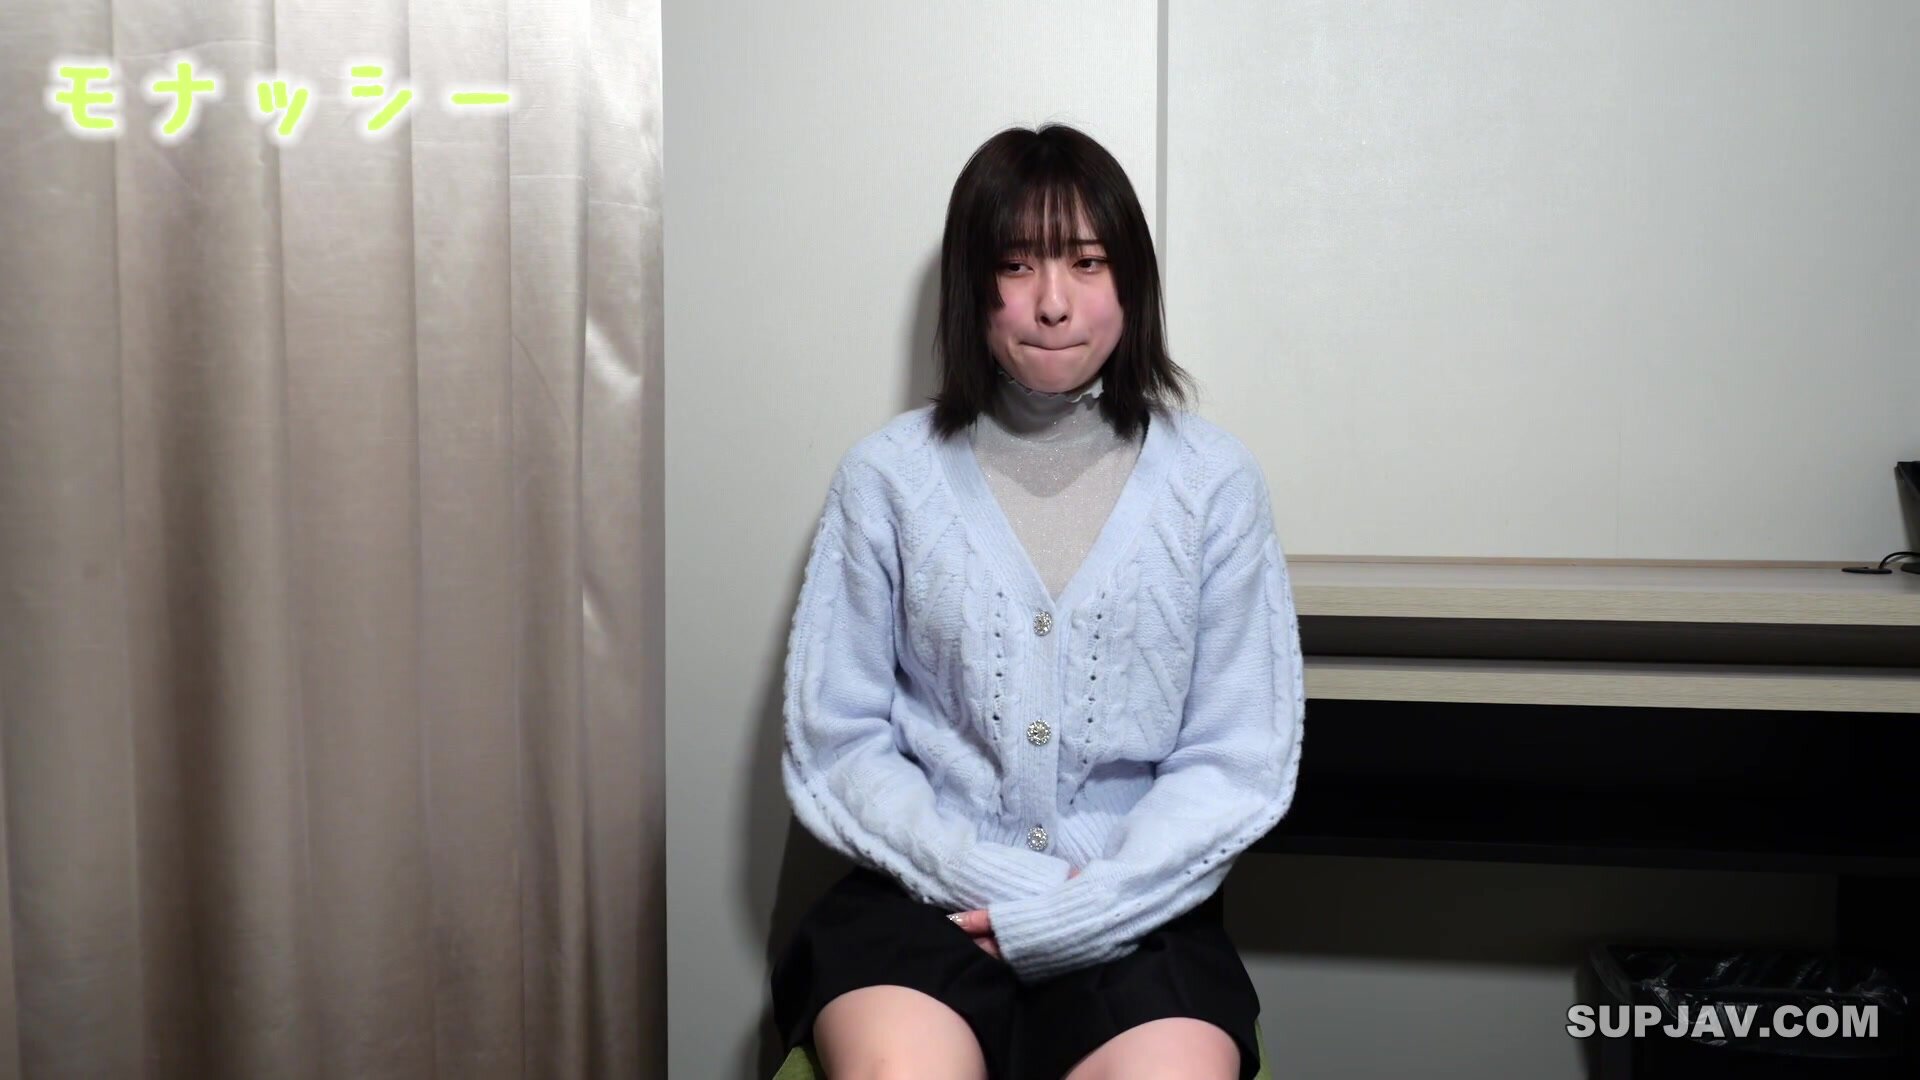 Pajama de Ojama ♥ Why did you come to the shoot? ♥No acting! You can see the reactions of real amateurs ♥ A JD with quiet eyes and a cute dialect came for an unfamiliar photo shoot ♥